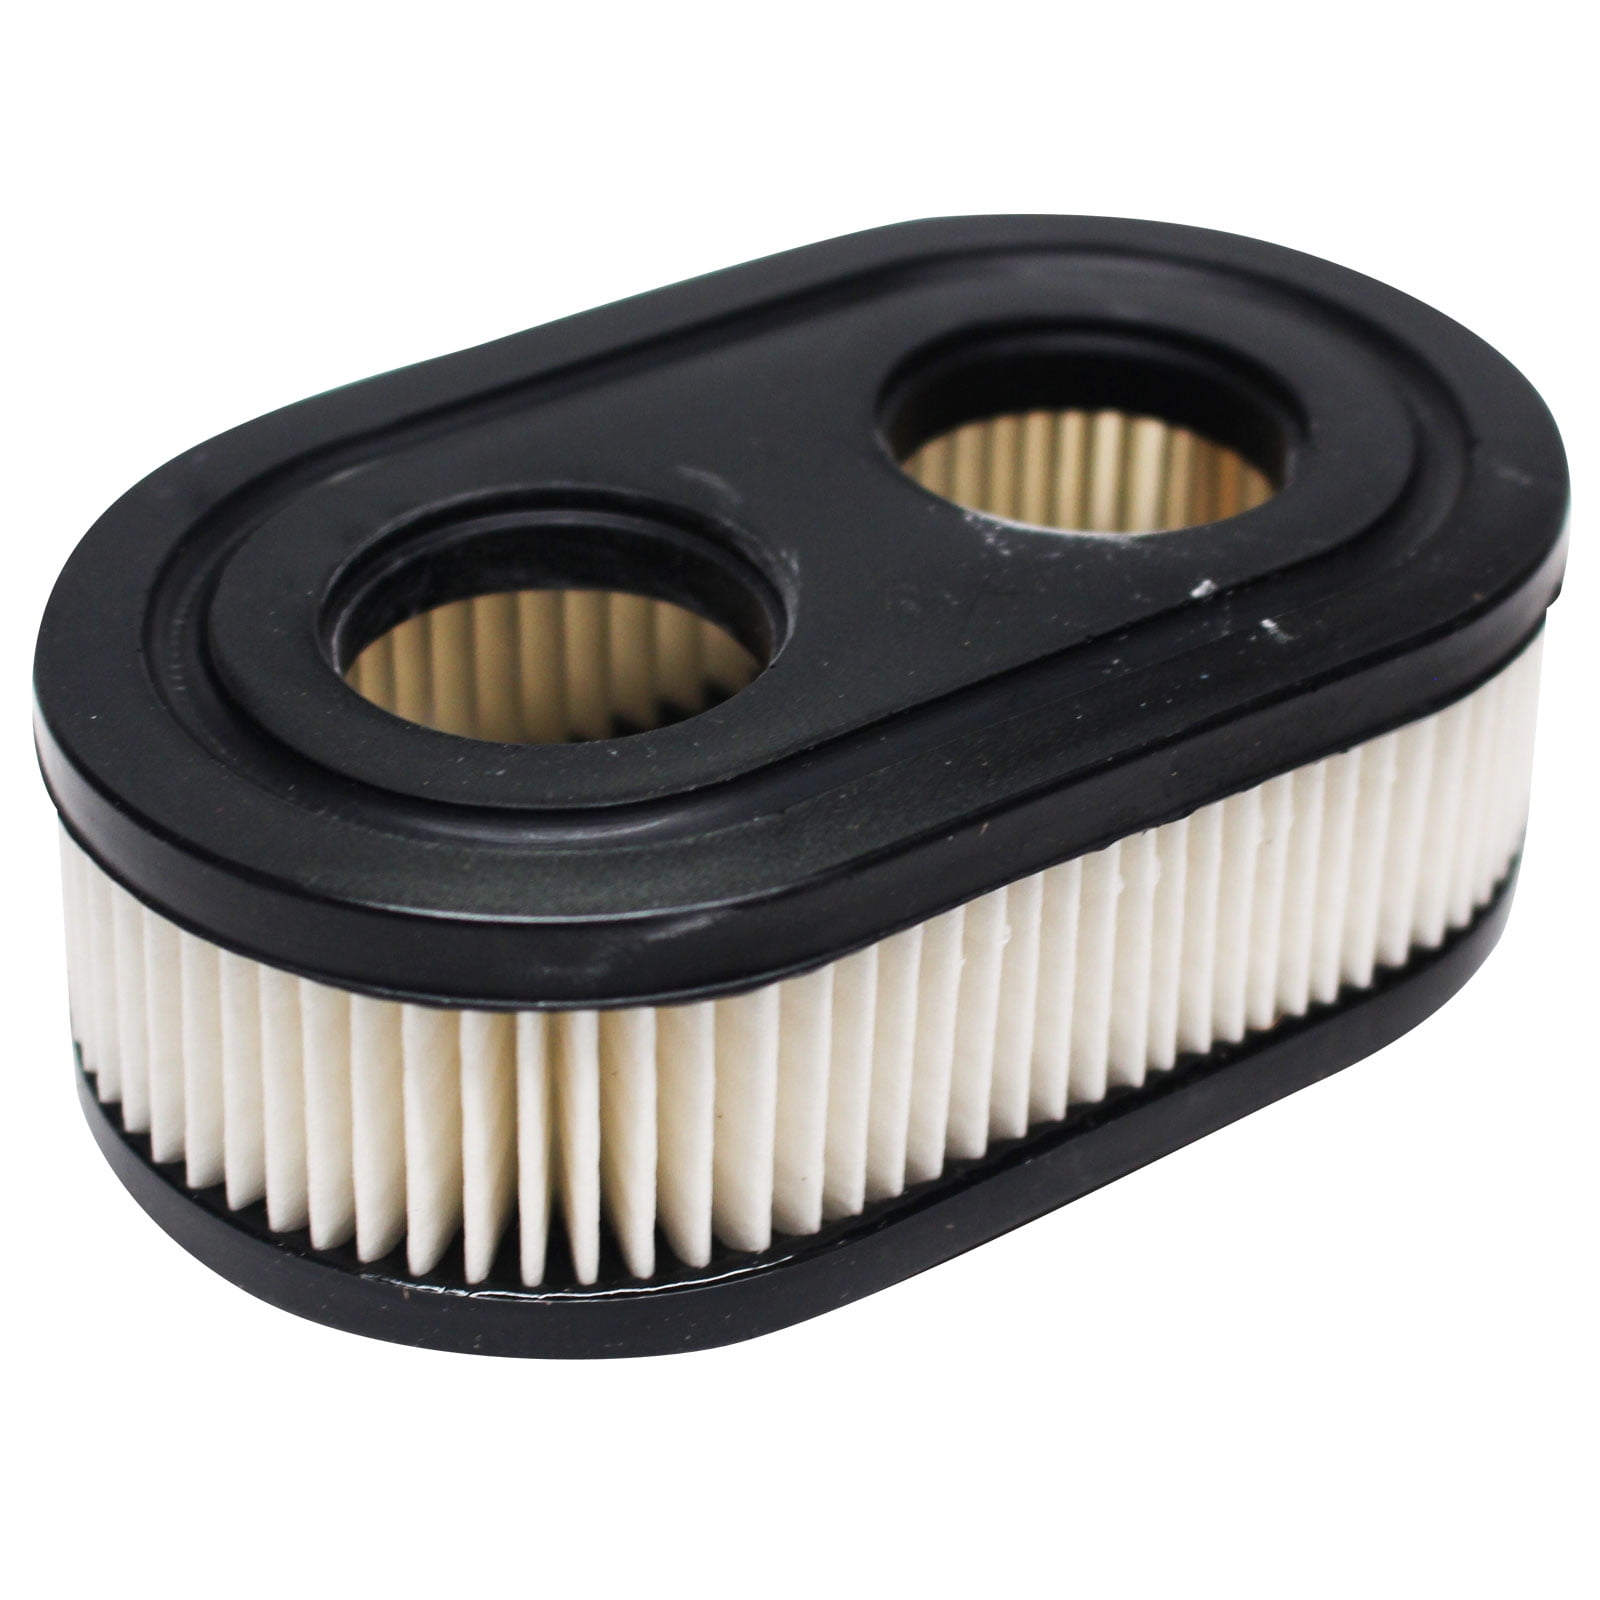 Details about   3 X Air Filter For Briggs & Stratton 593260 798452 4247 5432K 09P702 Lawn Mower 